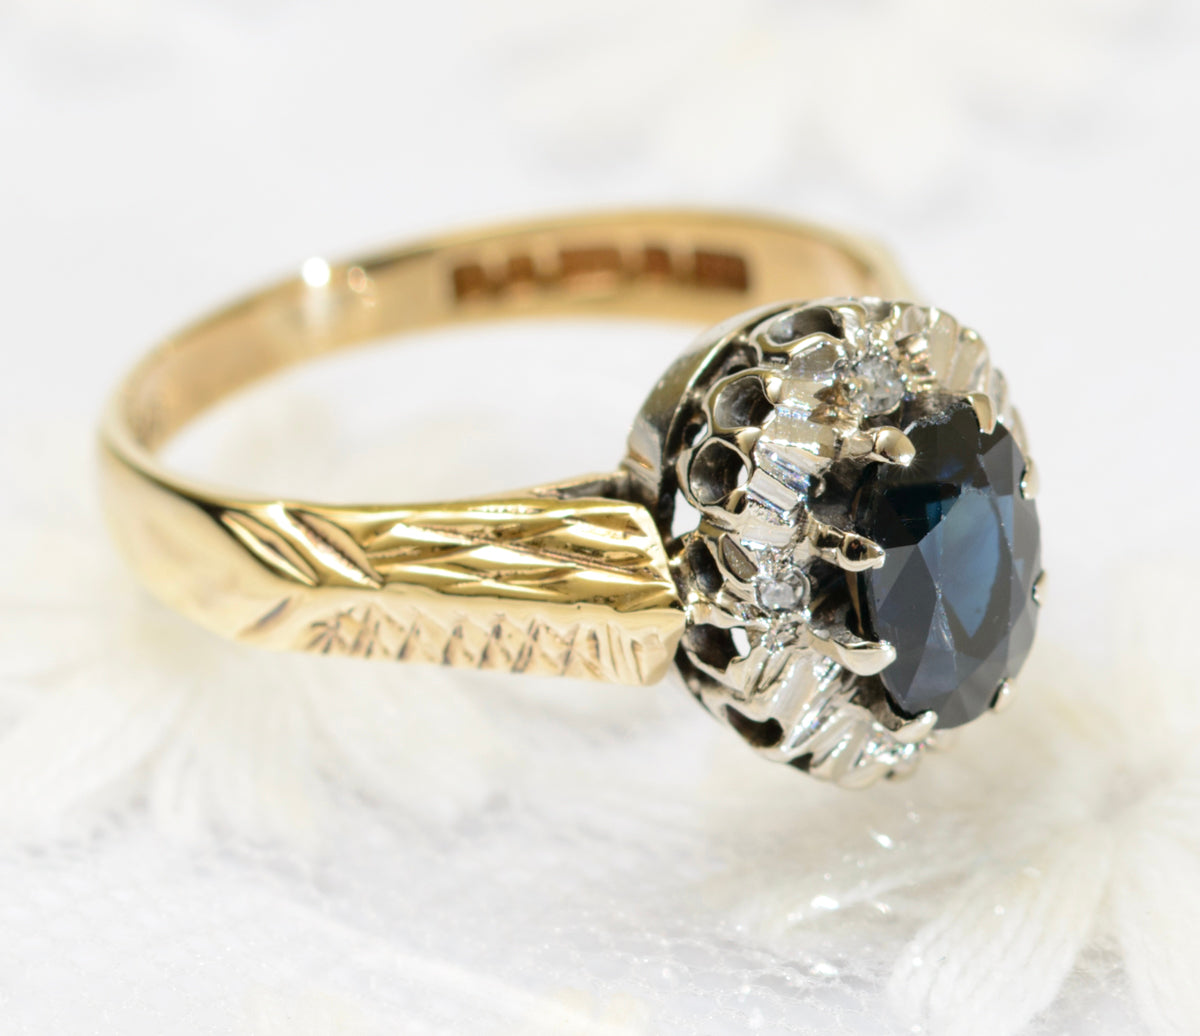 Vintage 9ct Gold Ring With 0.88 Carat Natural Sapphire & Diamond Halo (A1798)